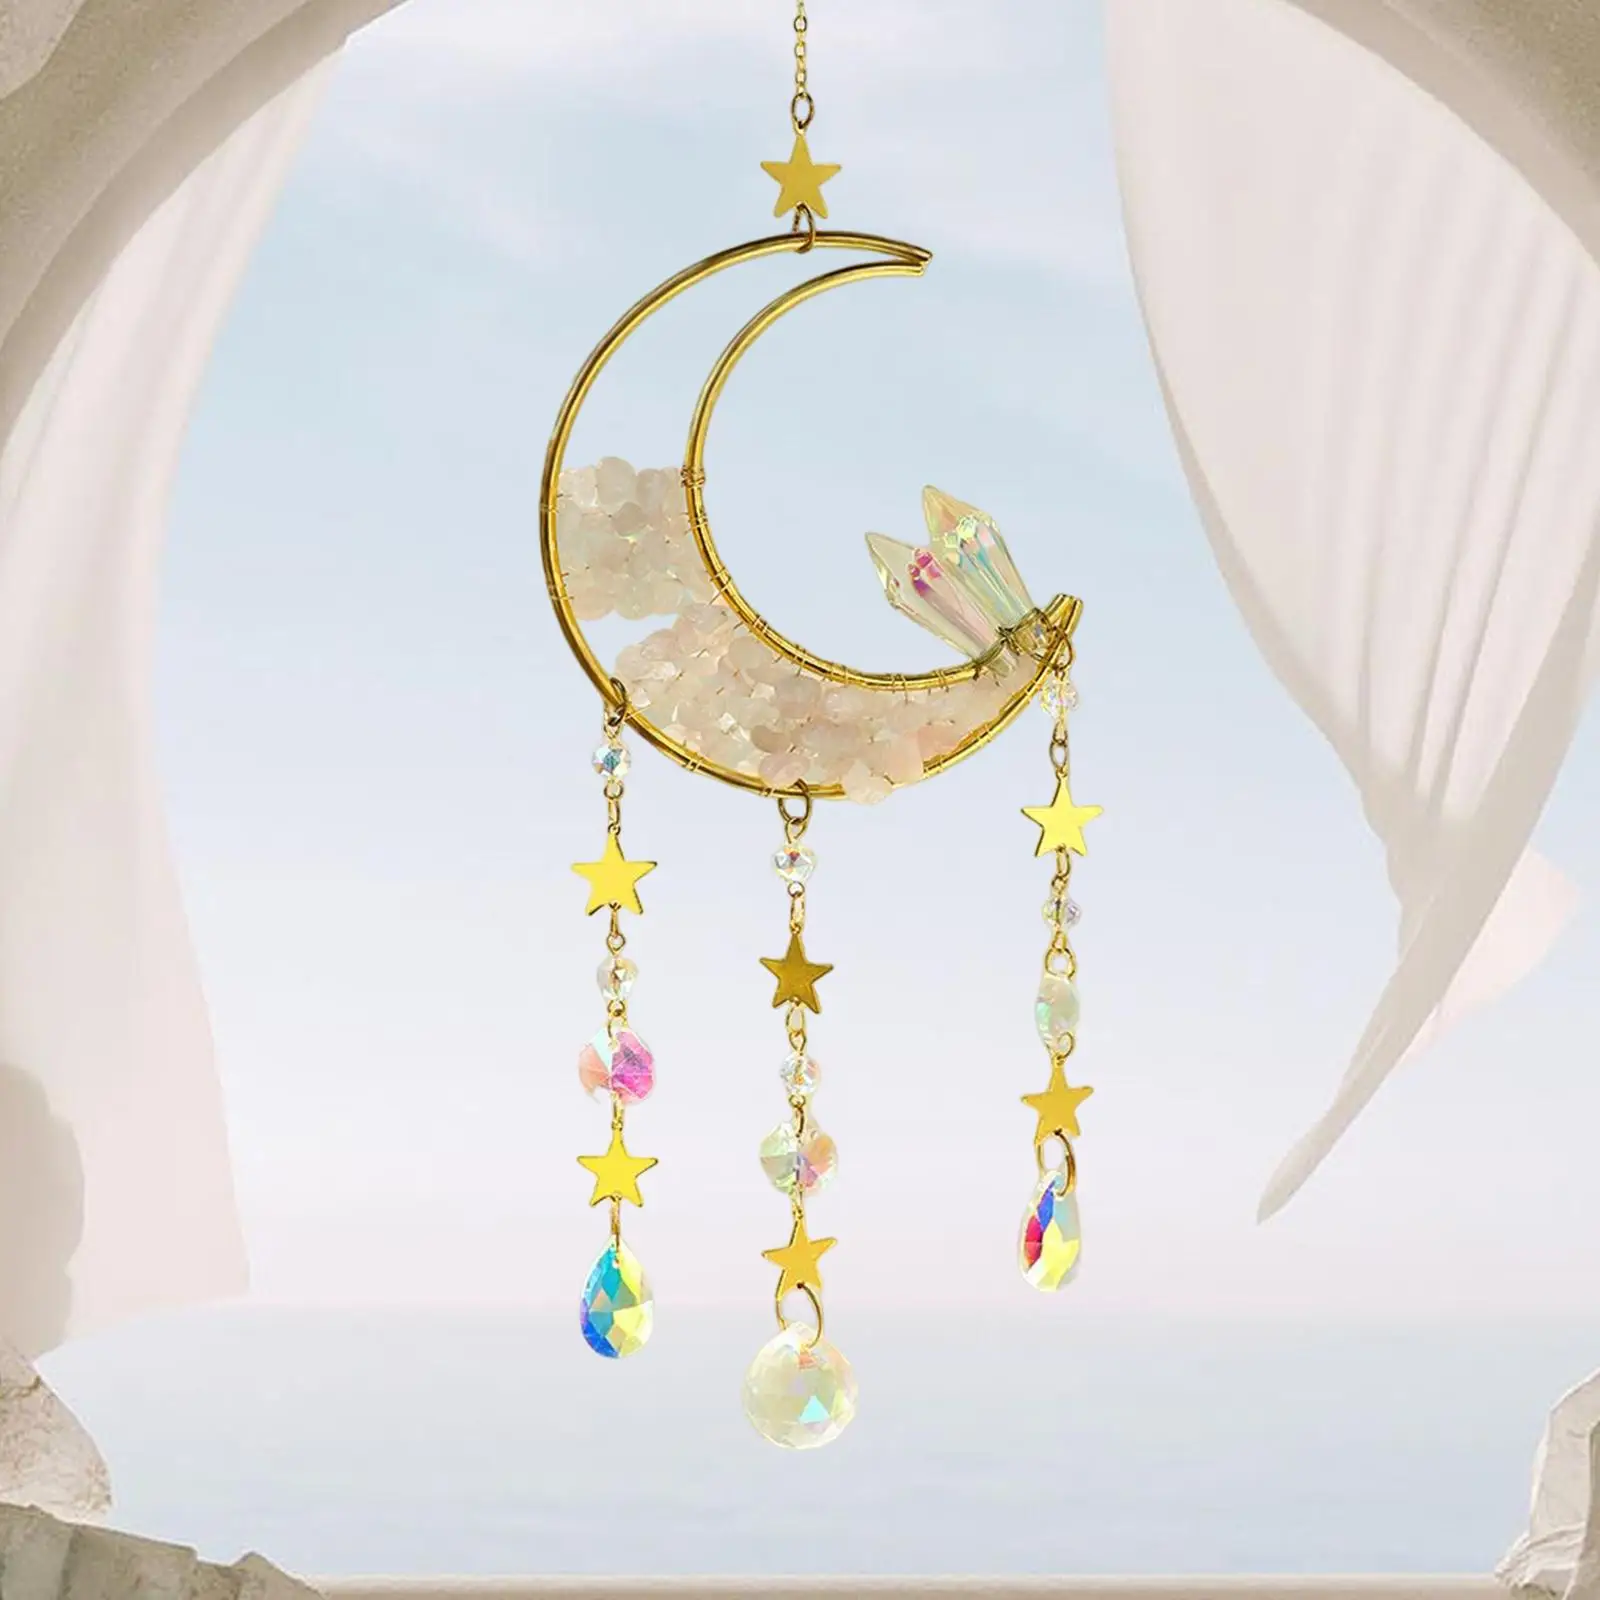 Moon Pendant Rainbow Maker Wind Chime Hanging Ornament for Bedroom Car Window